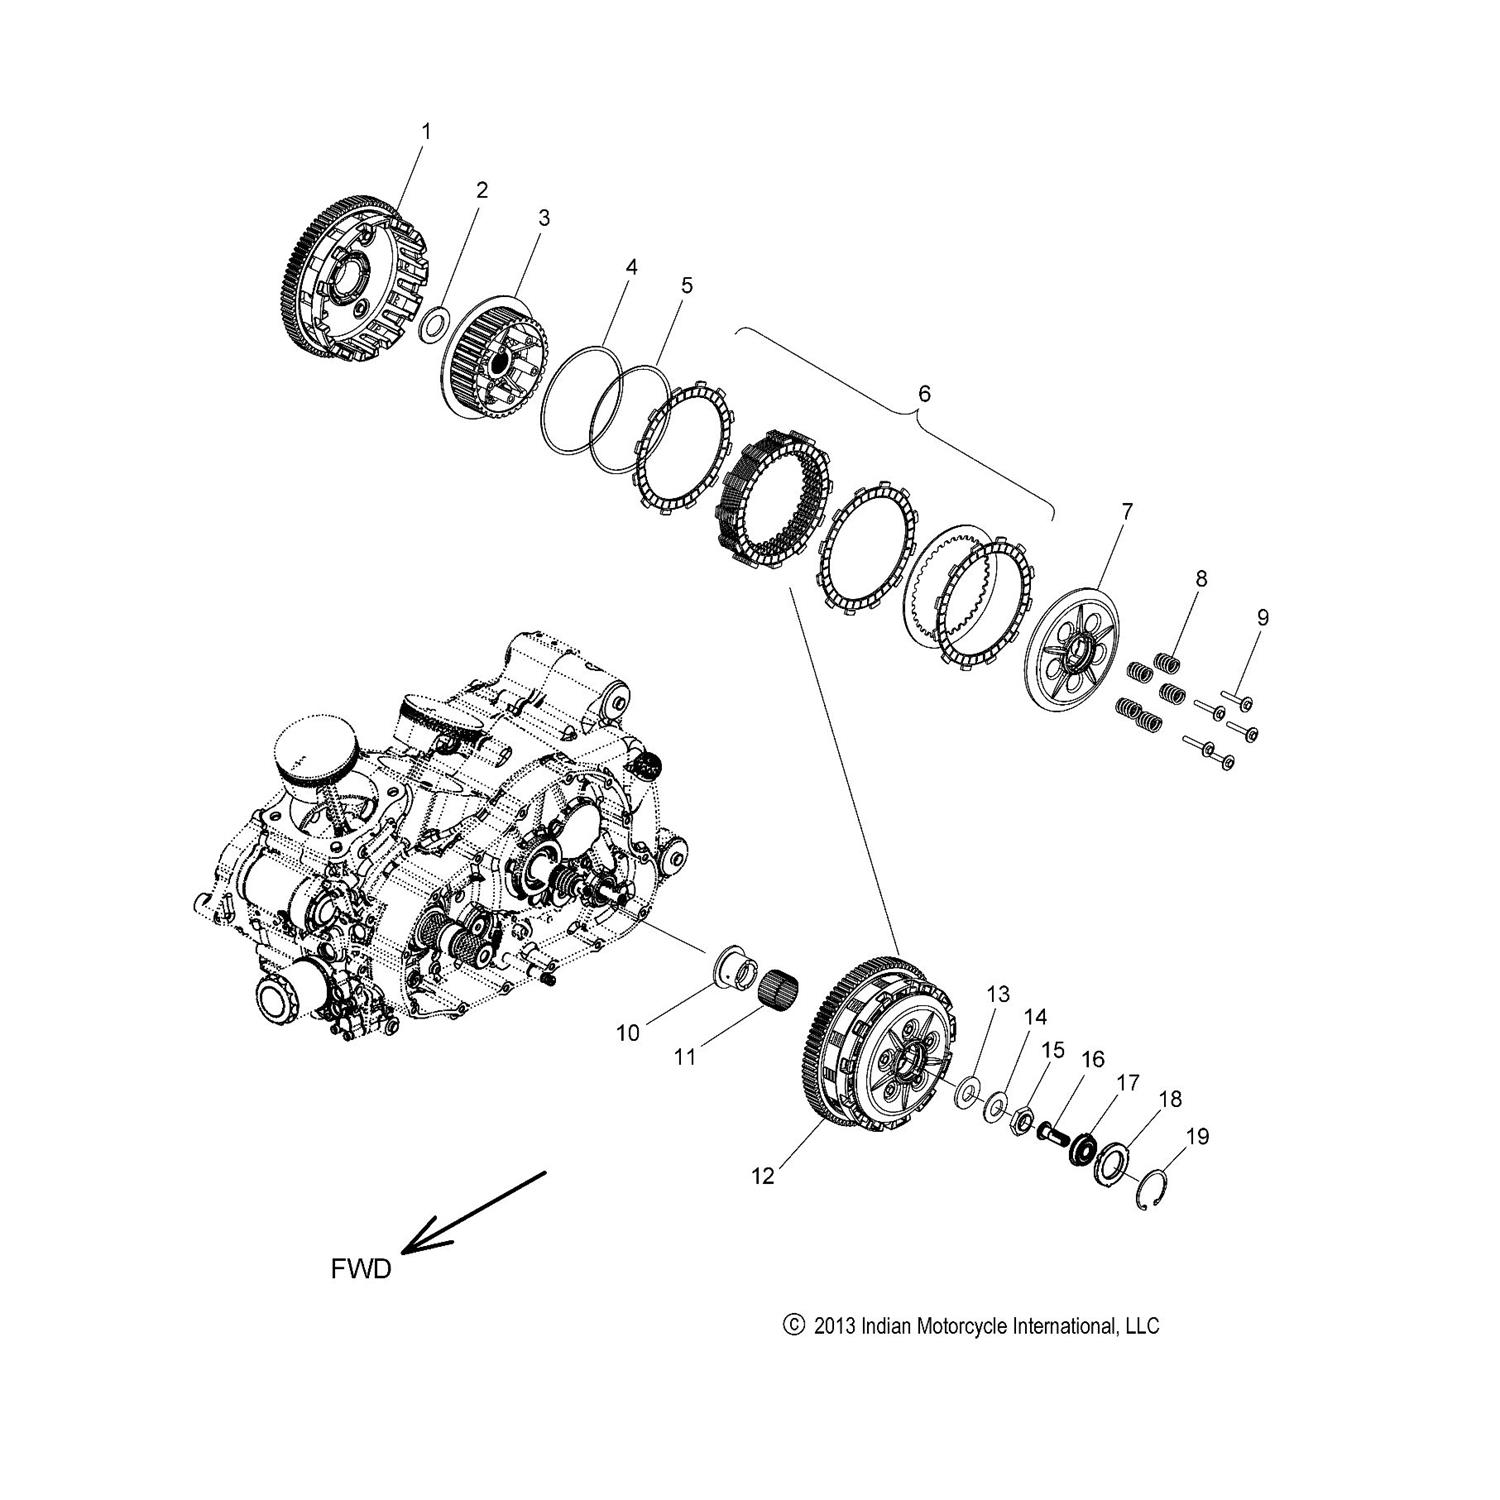 ASM., CLUTCH LIFTER [INCLUDES 18]